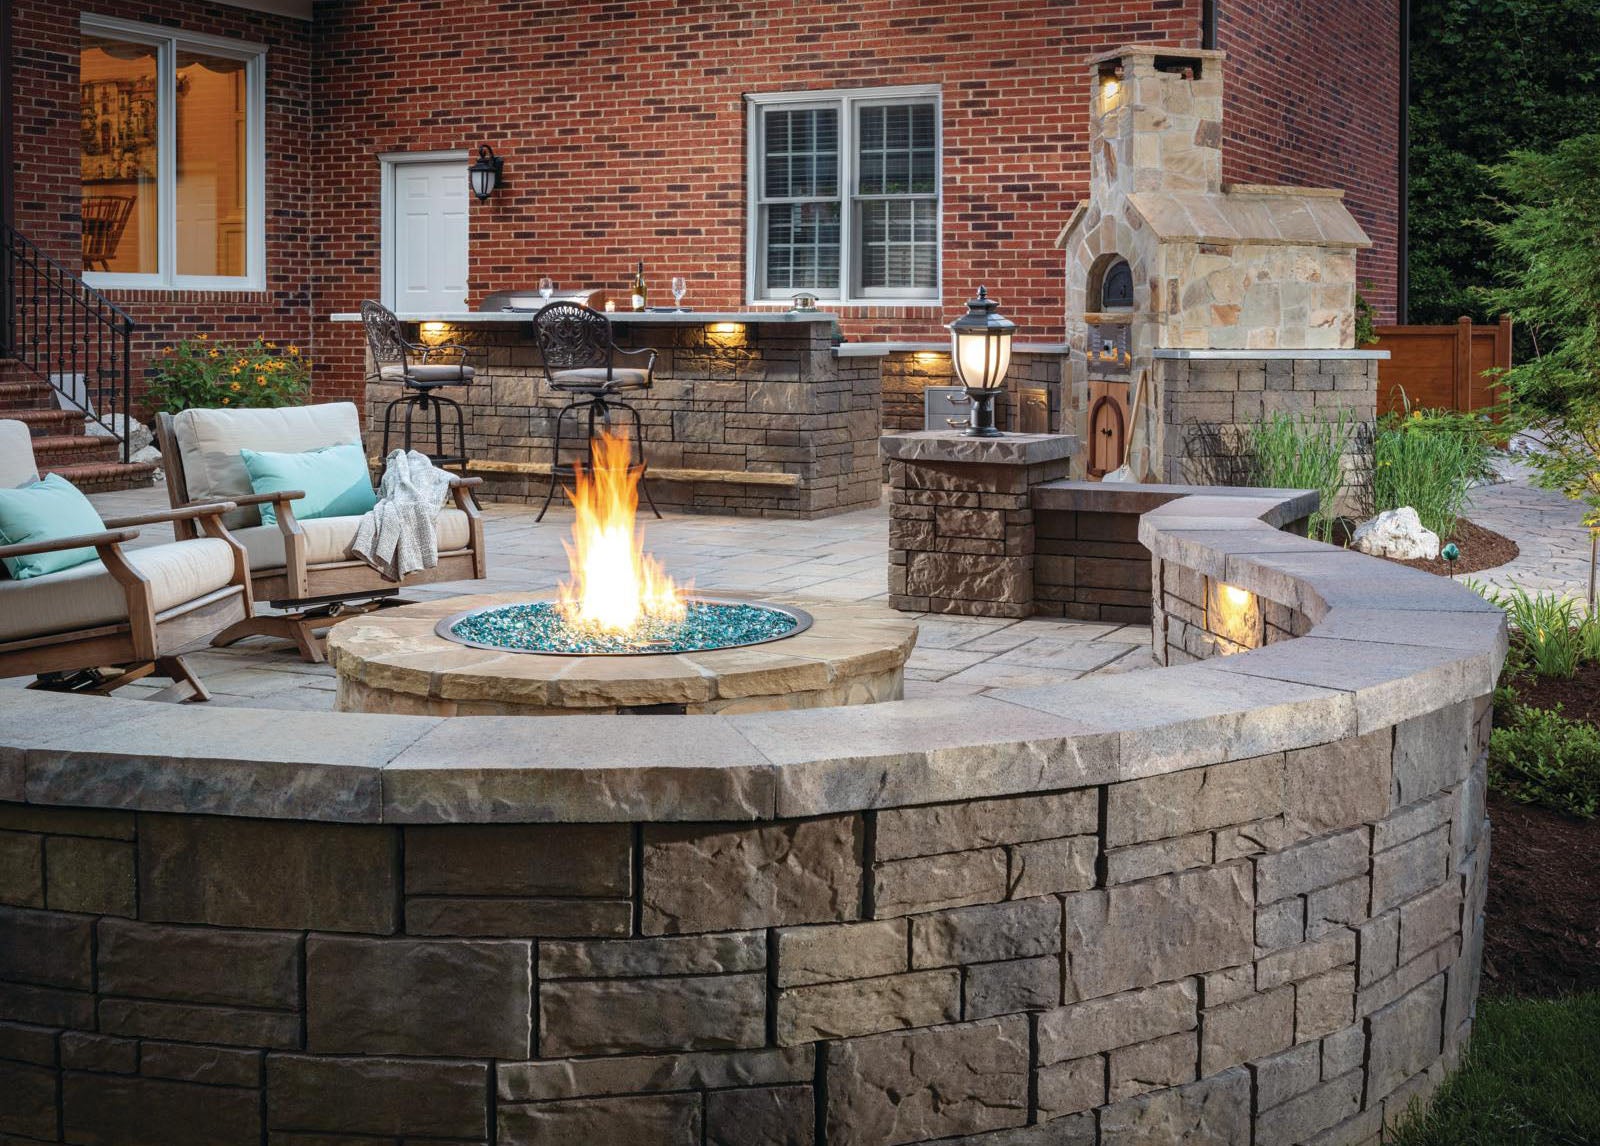 Designing A Patio Around Fire Pit, How To Make A Small Outdoor Fire Pit